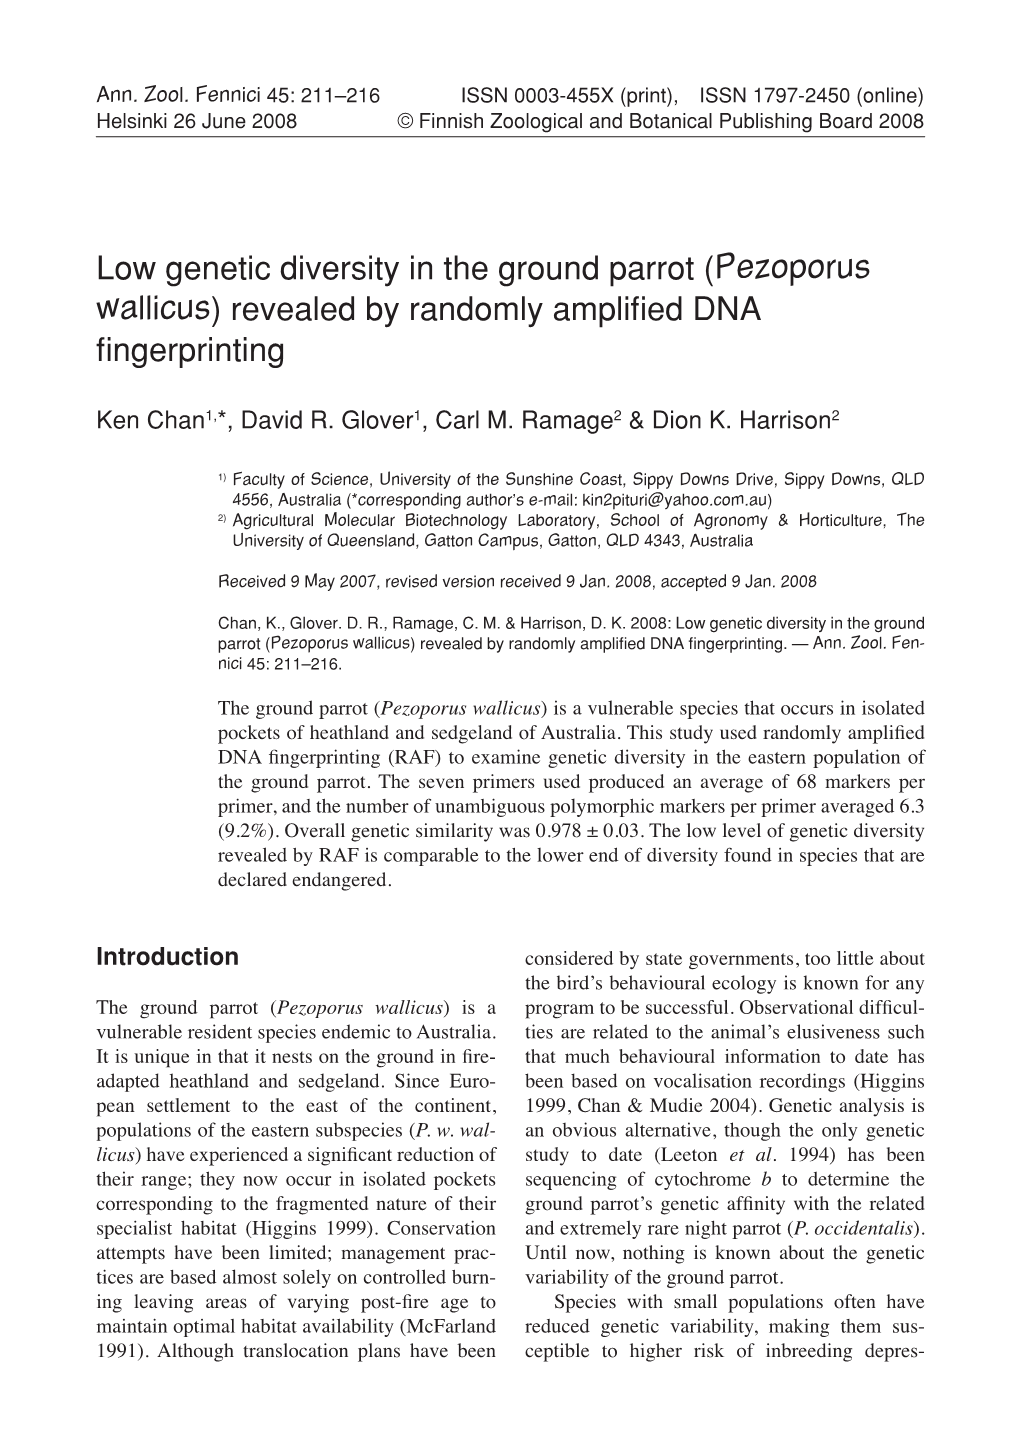 Low Genetic Diversity in the Ground Parrot (Pezoporus Wallicus) Revealed by Randomly Amplified DNA Fingerprinting